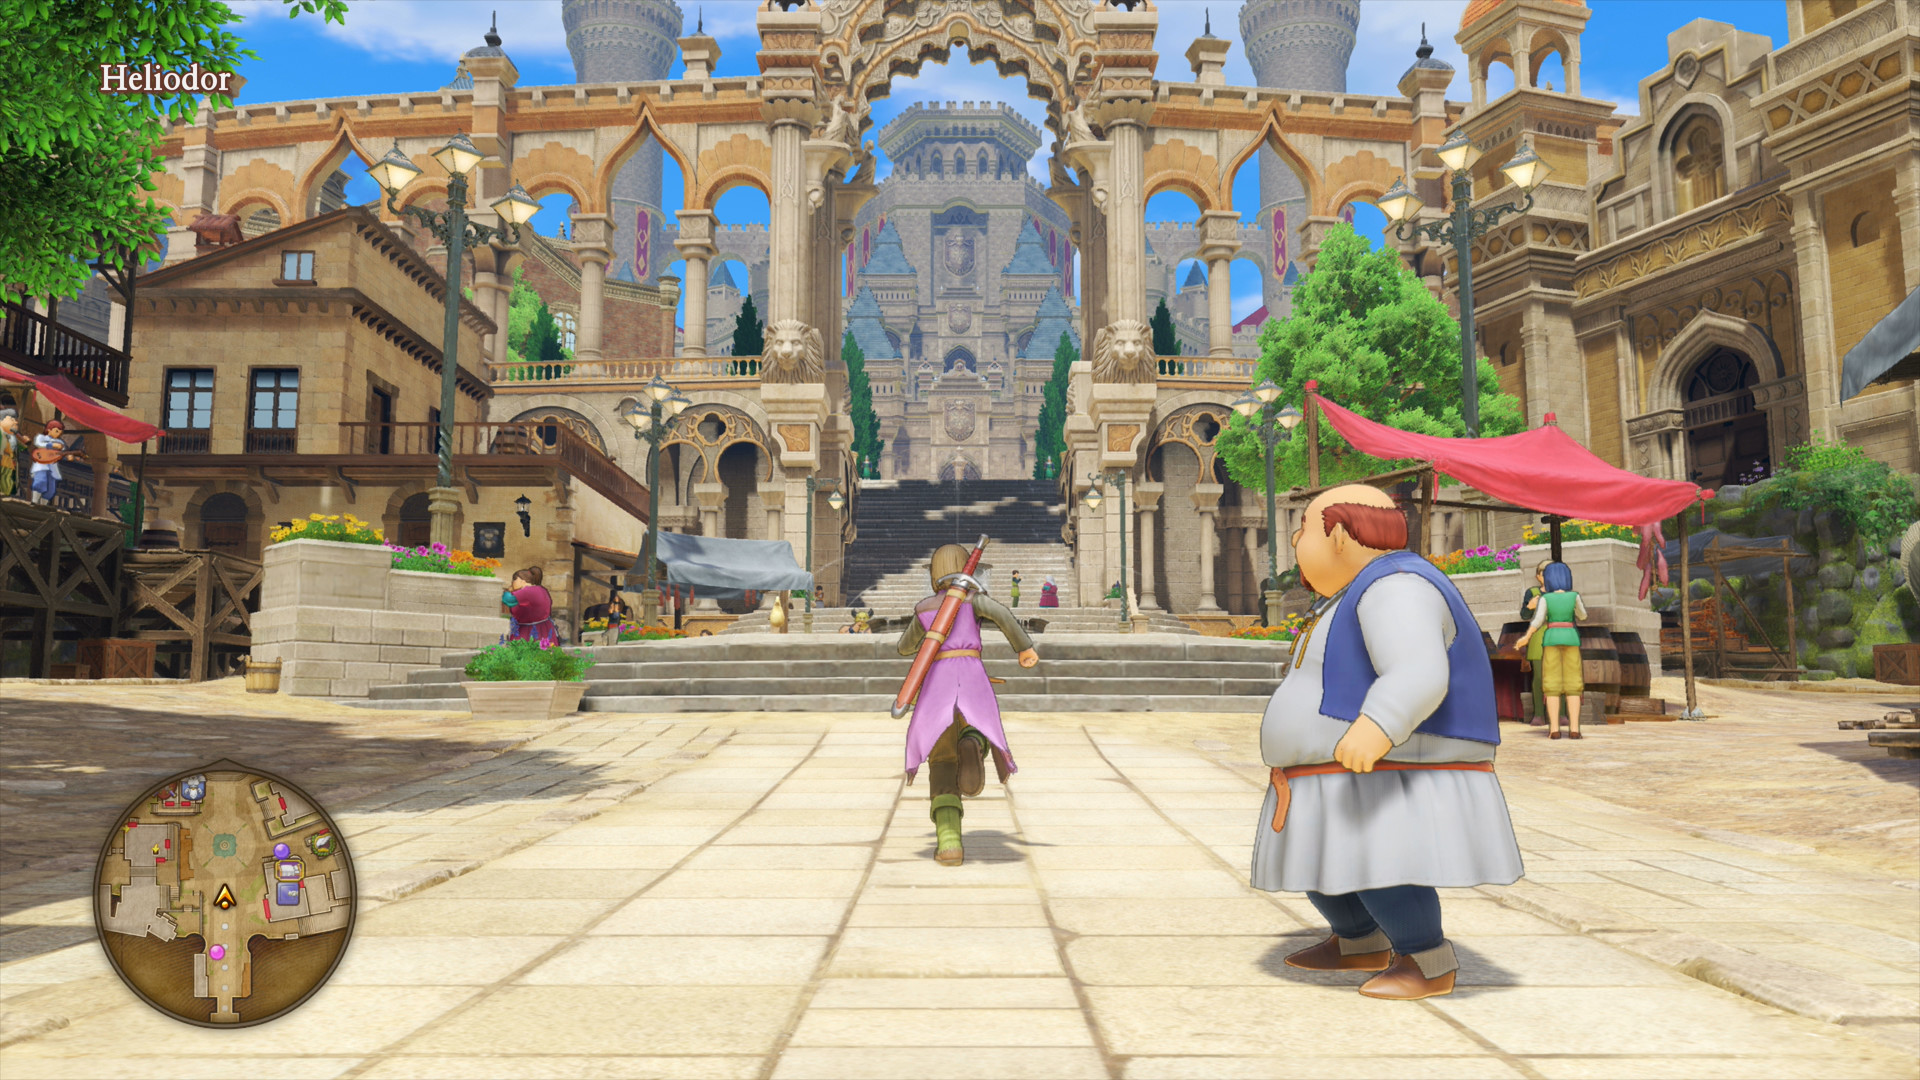 Скриншоты к игре Dragon Quest XI: Echoes of an Elusive Age. 